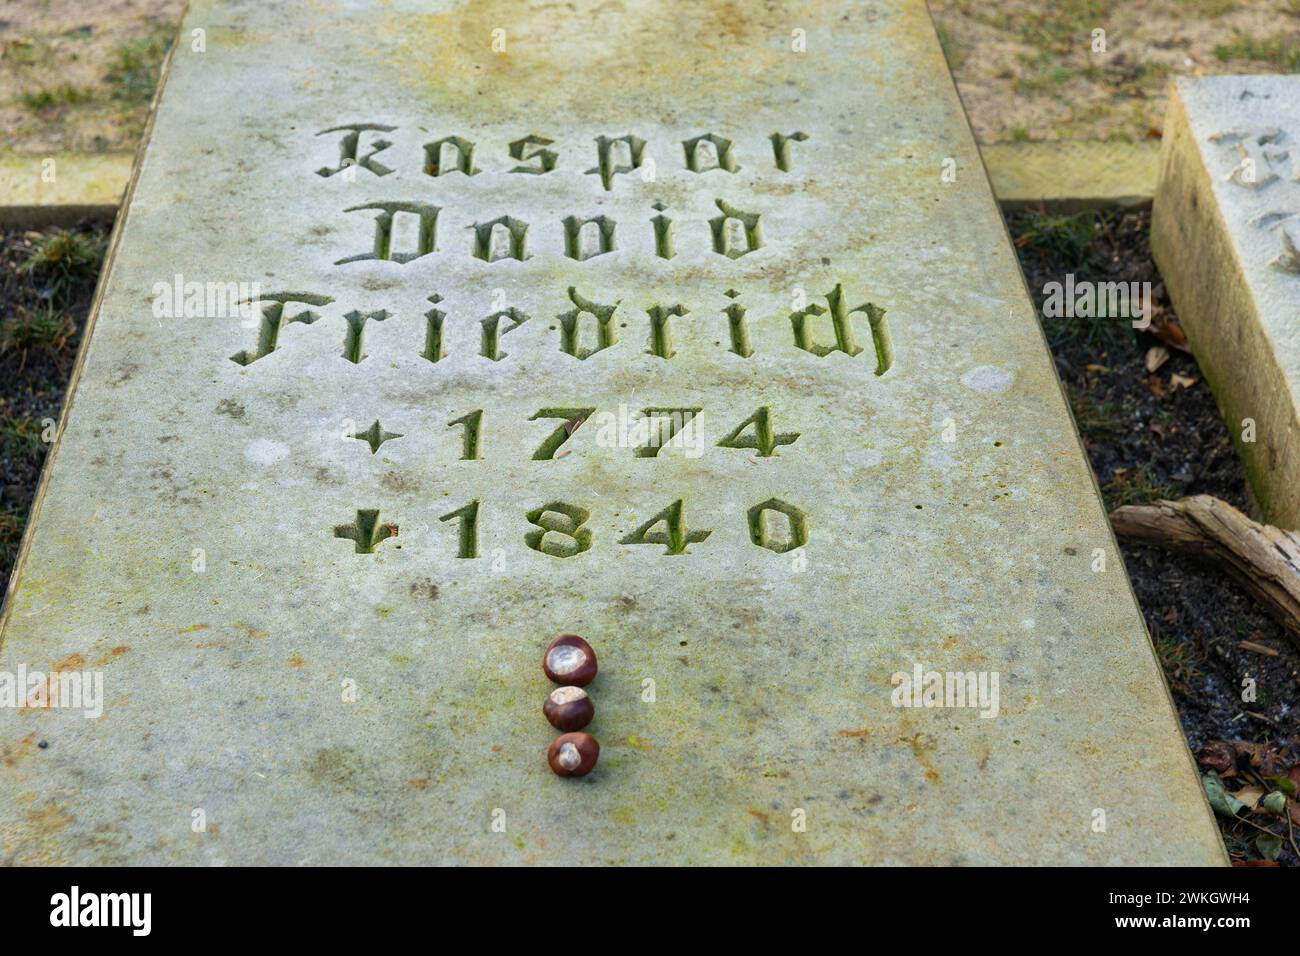 The Trinitatisfriedhof cemetery in Dresden's Johannstadt district is one of the city's burial grounds originally laid out as an epidemic cemetery Stock Photo